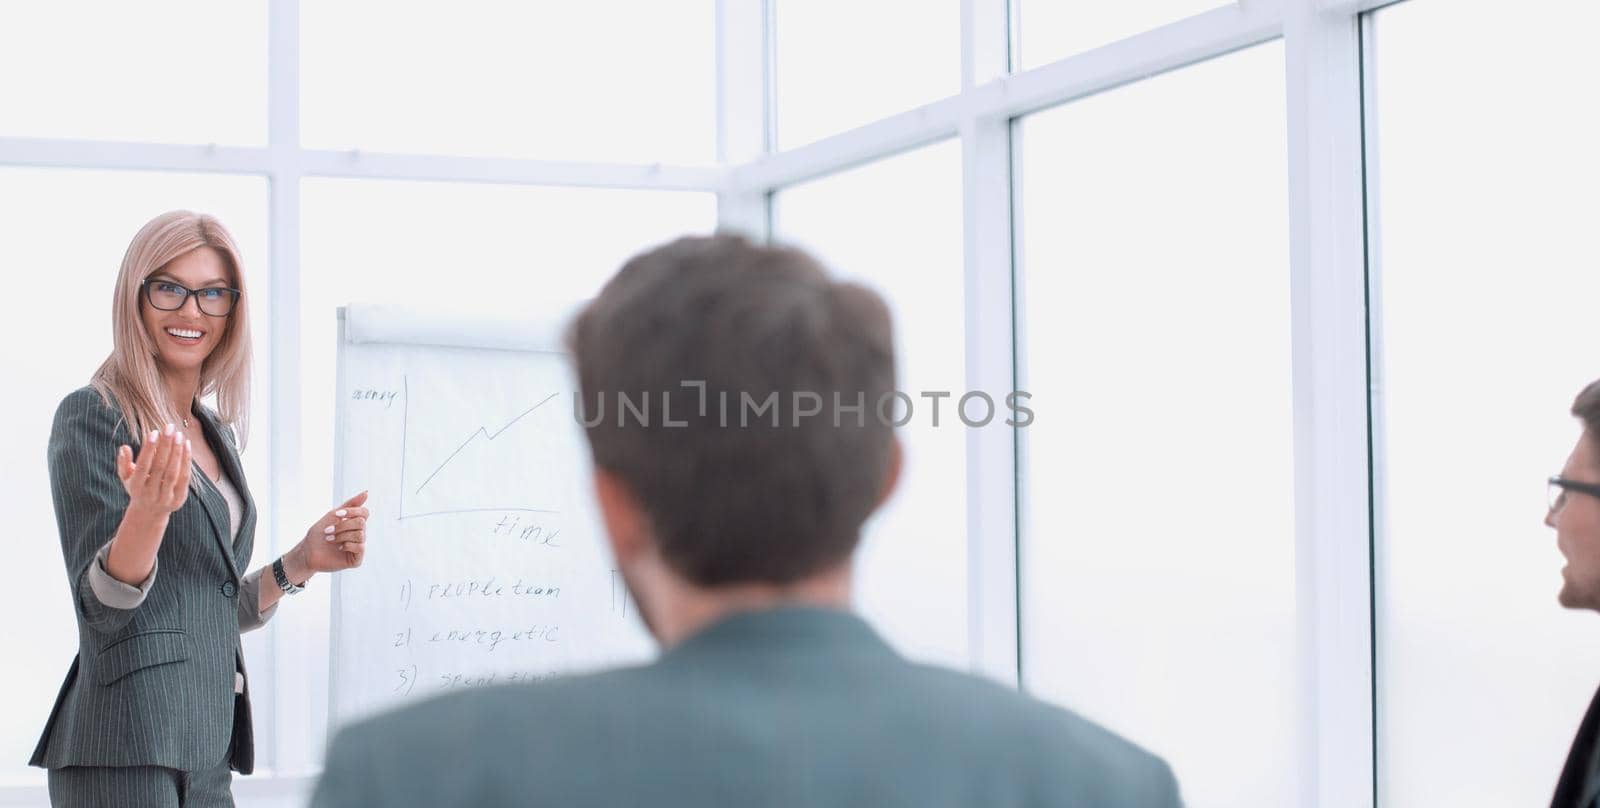 background image of business presentation in the office. photo with copy space